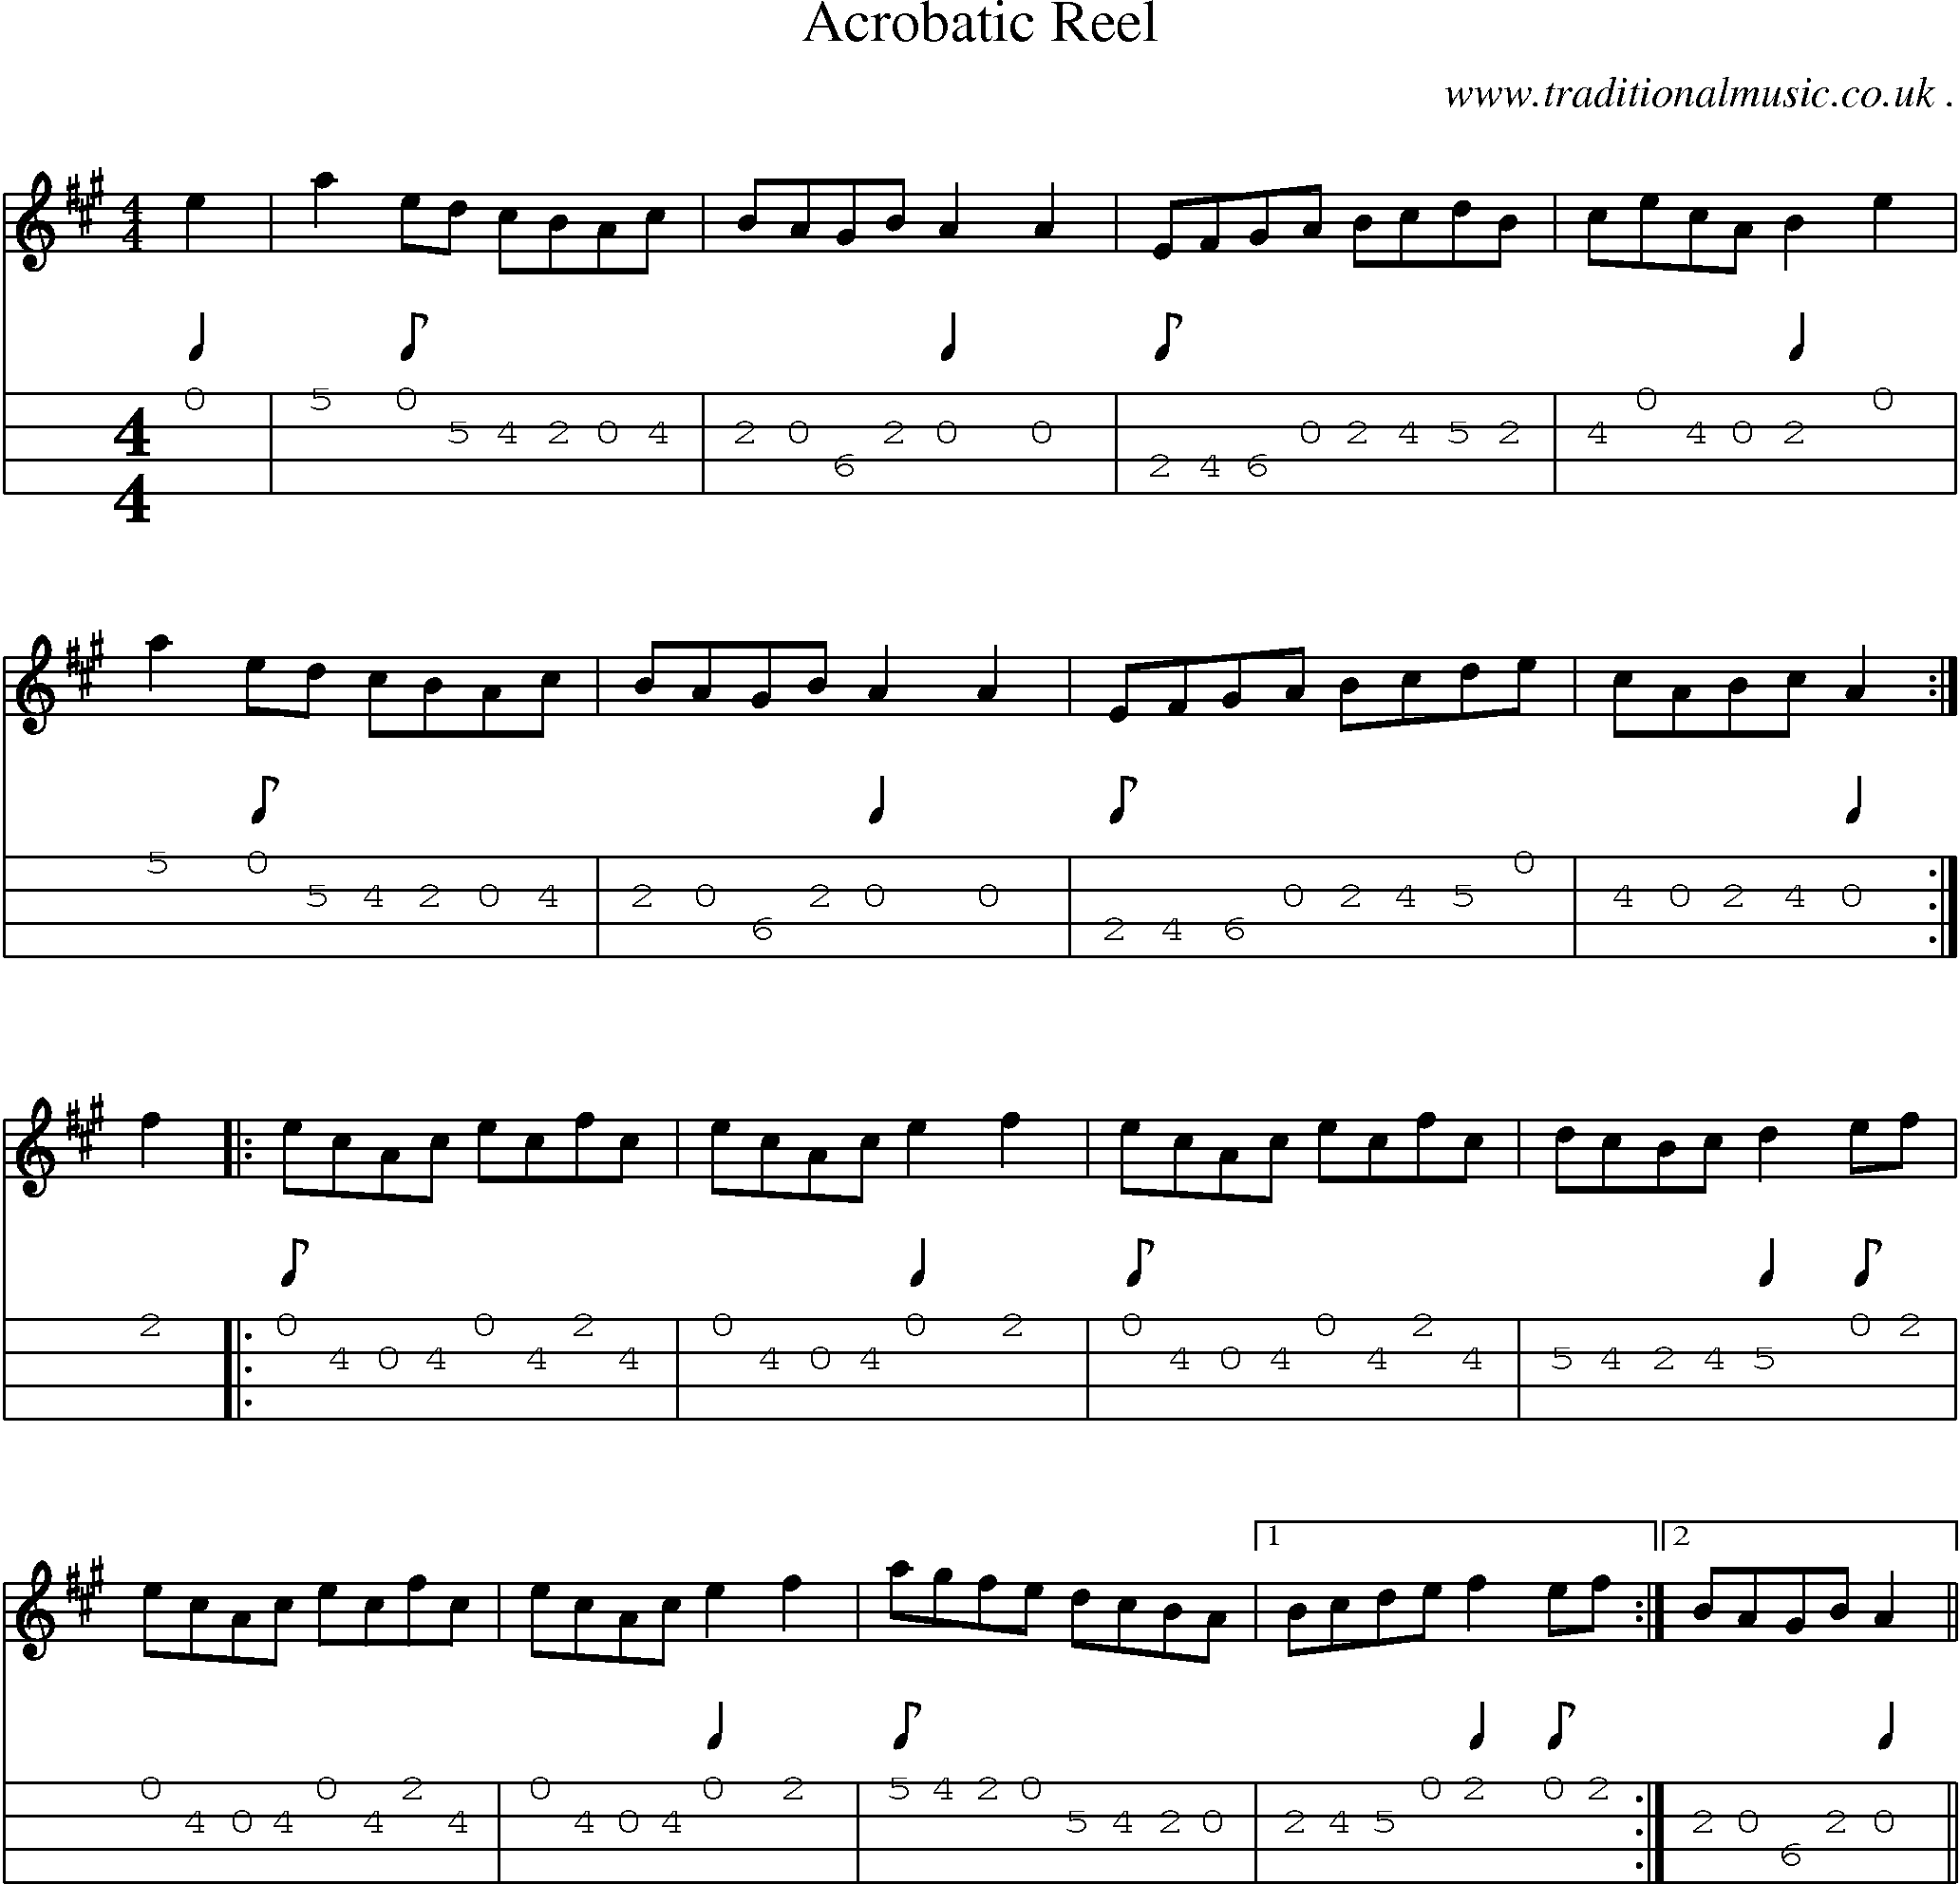 Music Score and Guitar Tabs for Acrobatic Reel